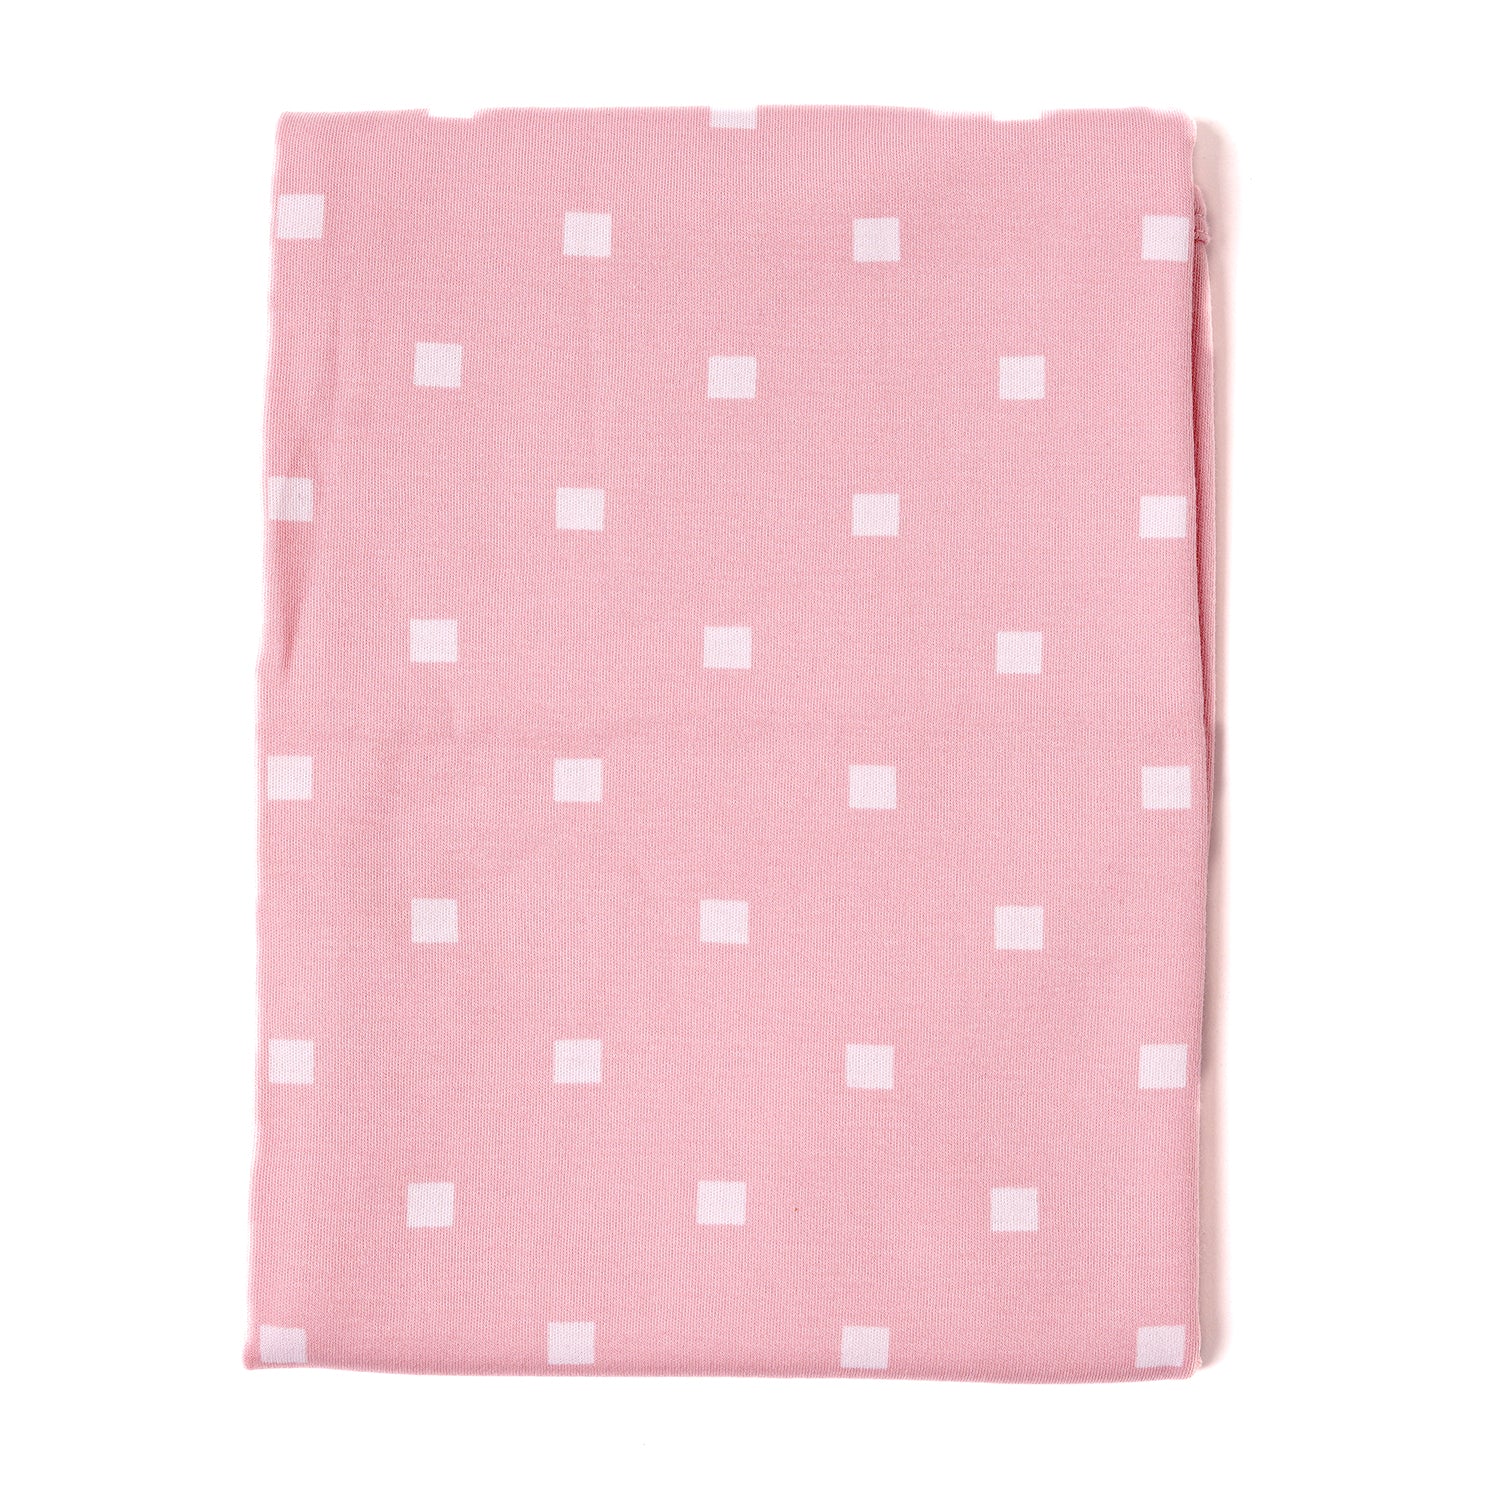 Cotton Jersey Swaddle - Pink Polka